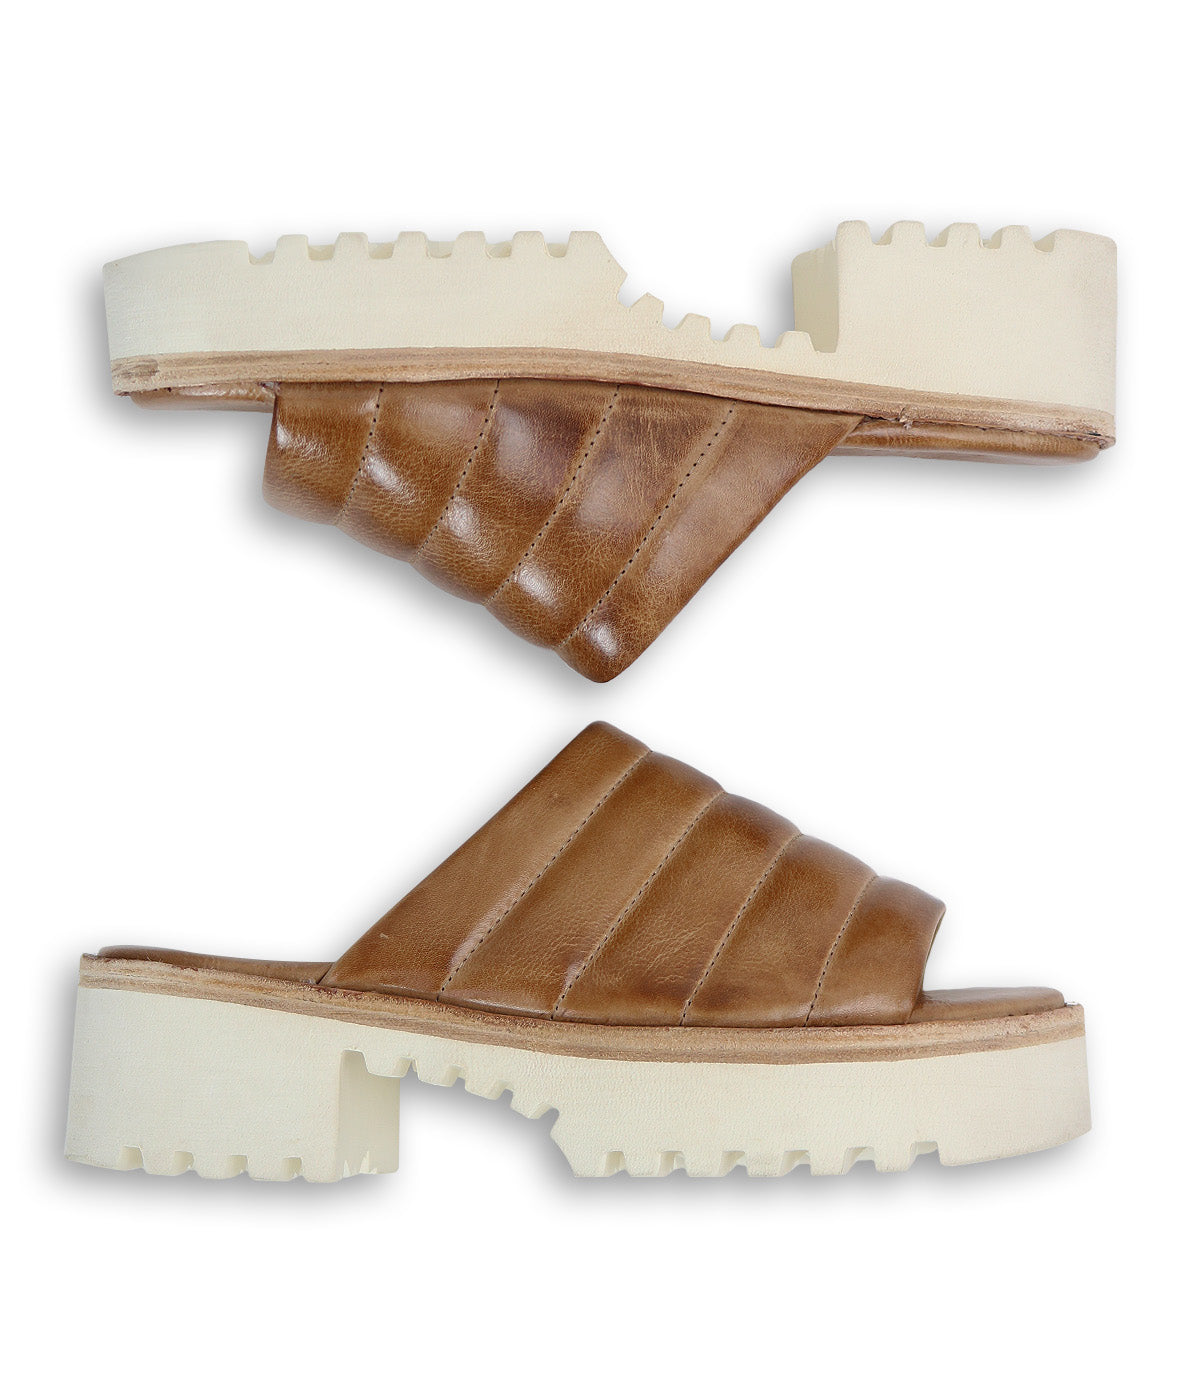 A pair of Jones tan leather sandals with white soles from Bed Stu.